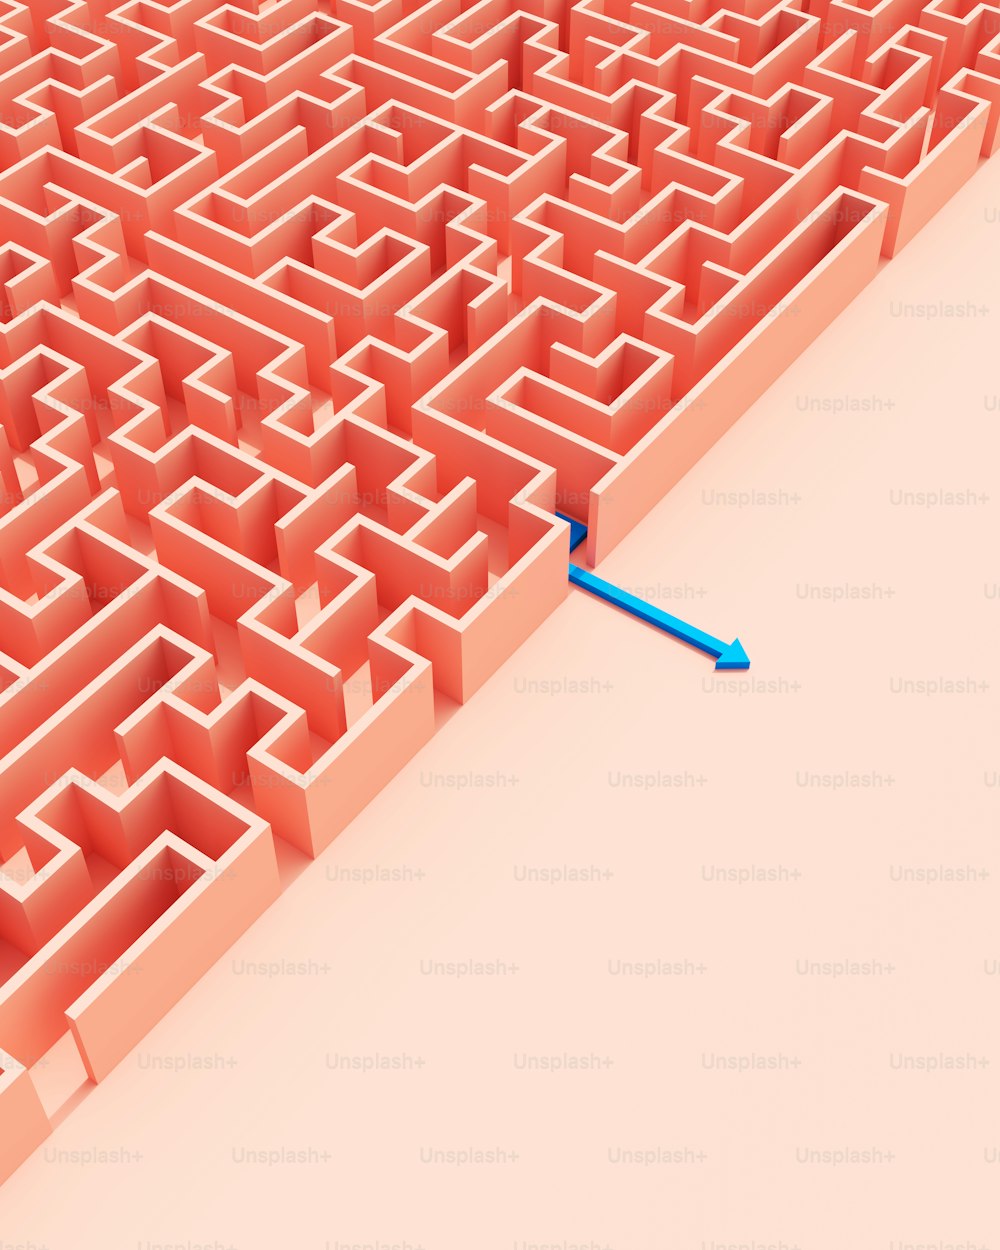 a blue arrow is in the middle of a maze